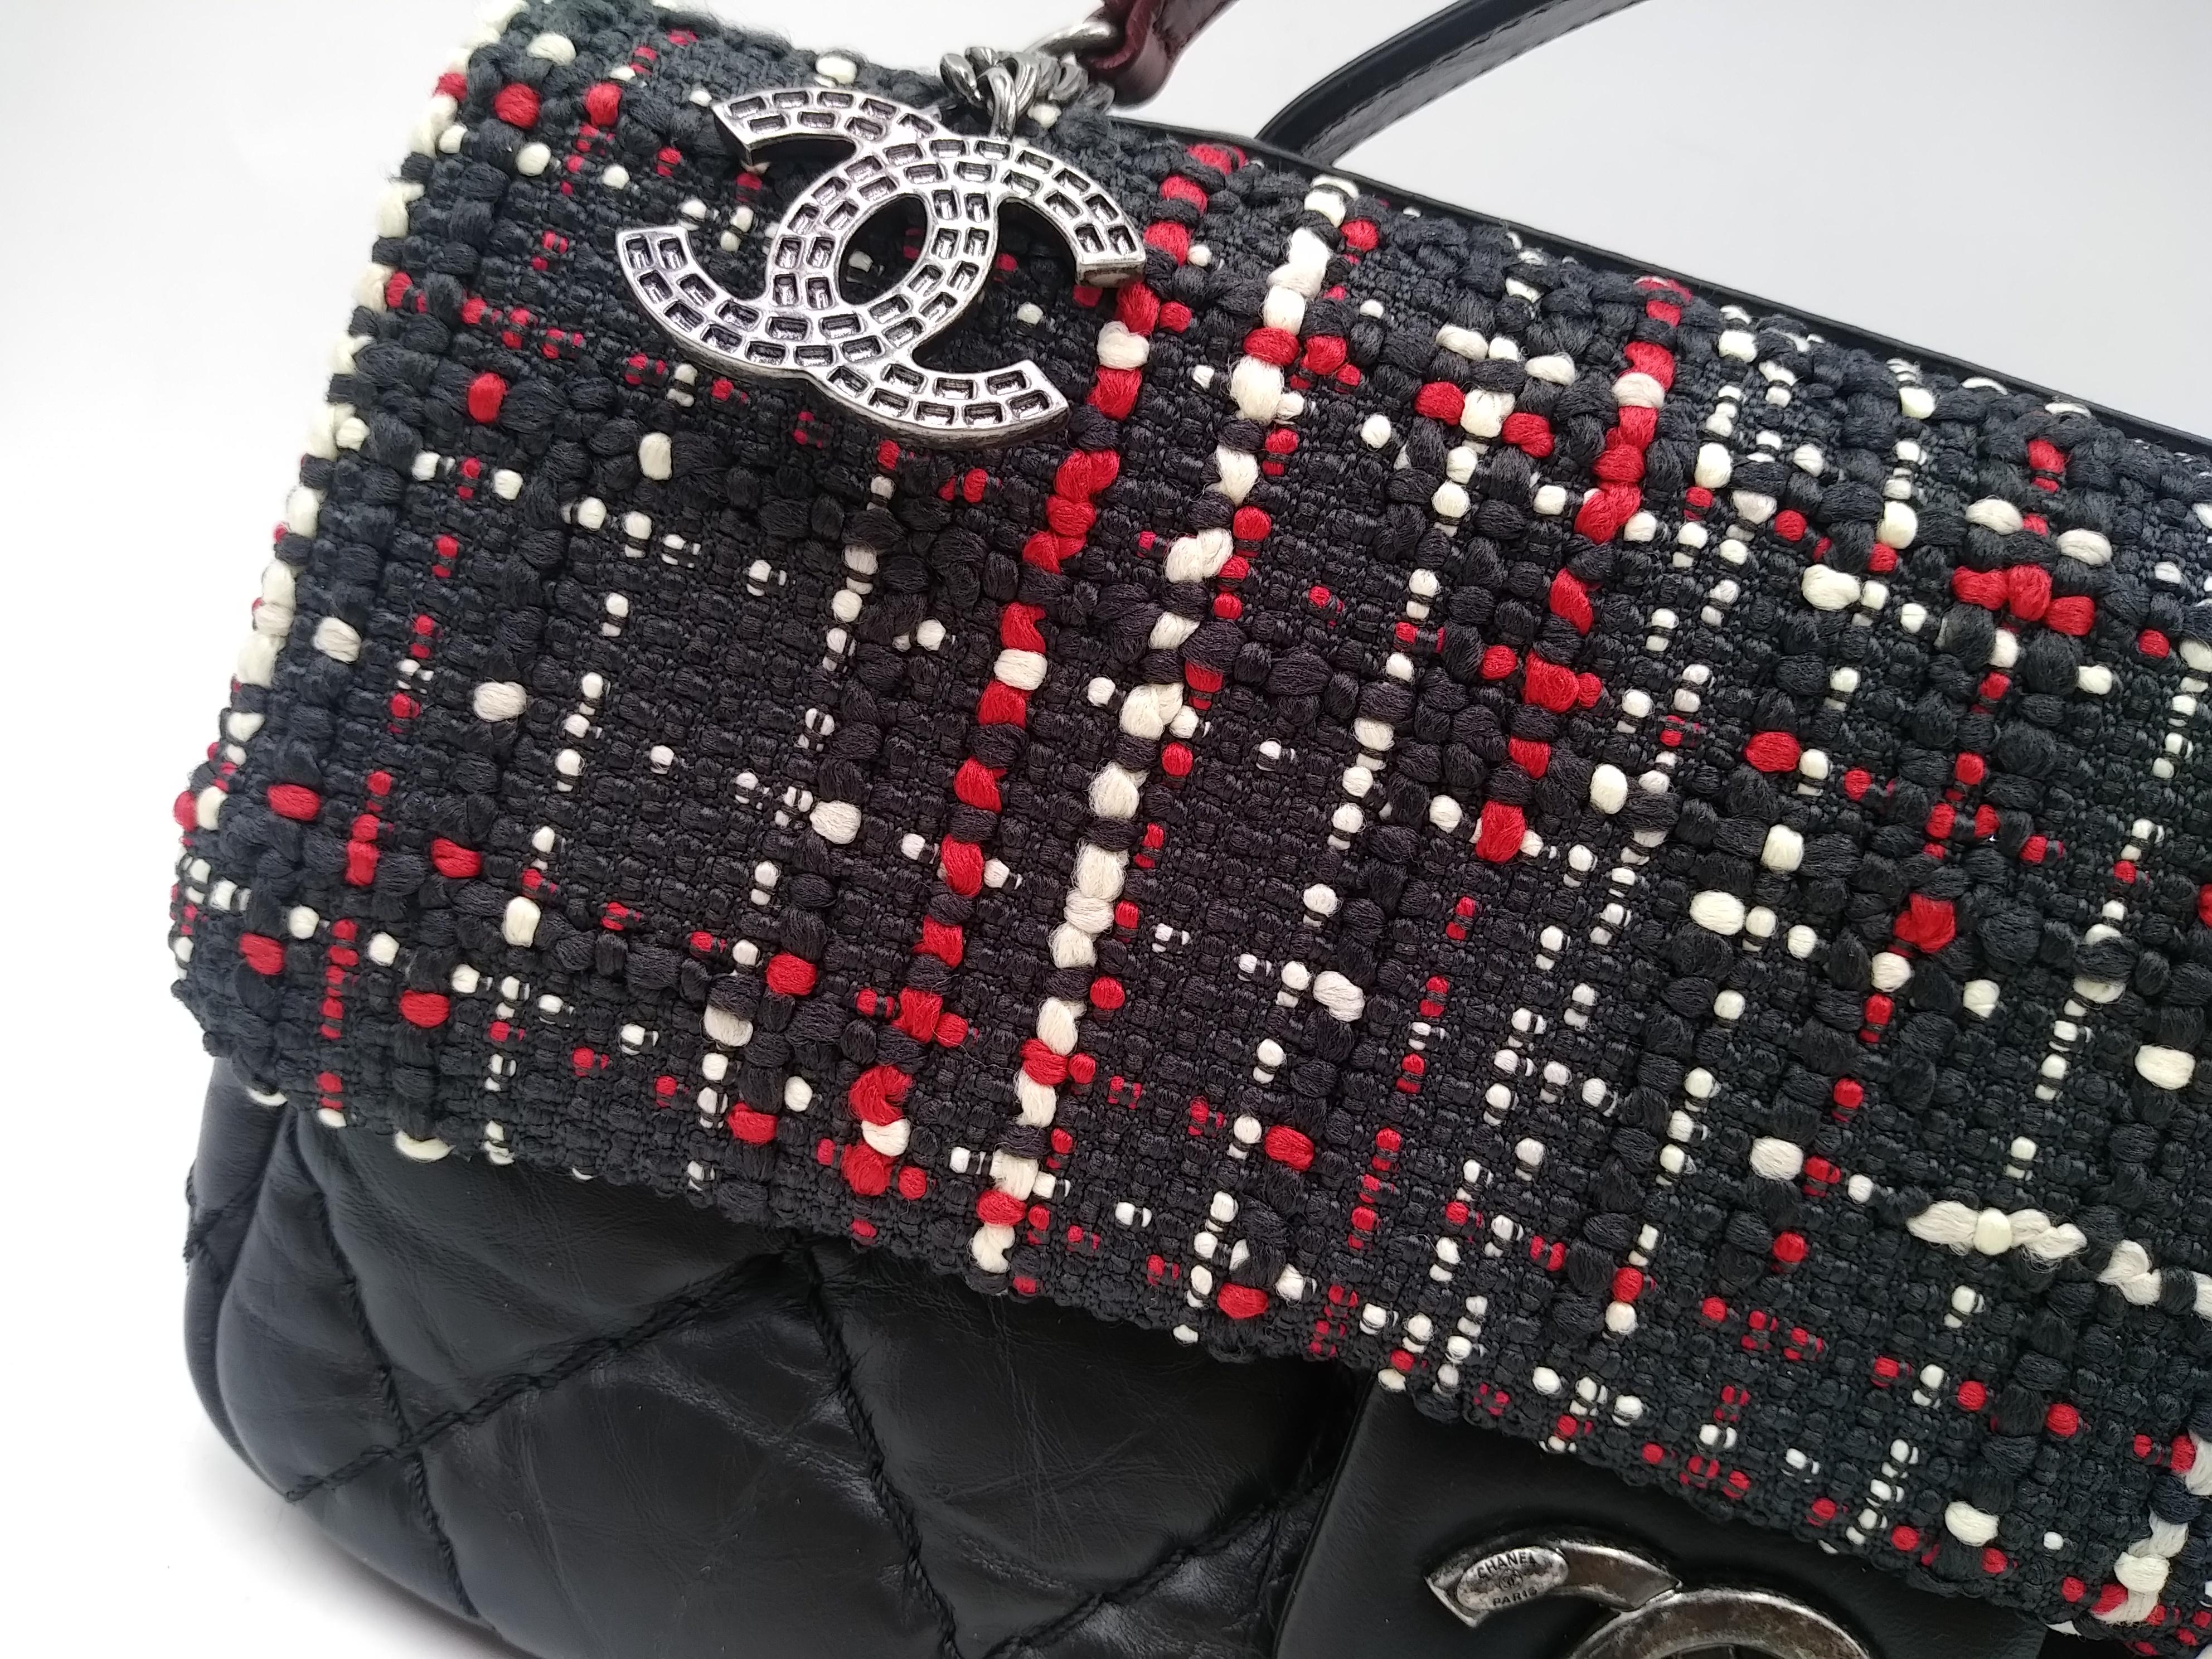 Chanel Airlines Top Handle Flap Bag Tweed and Quilted Aged Calfskin Medium, 2017
- 100% authentic Chanel
- black quilted calfskin and multicolor tweed
- leather top handle and woven-in leather chain strap
- CC turn-lock closure 
- red fabric